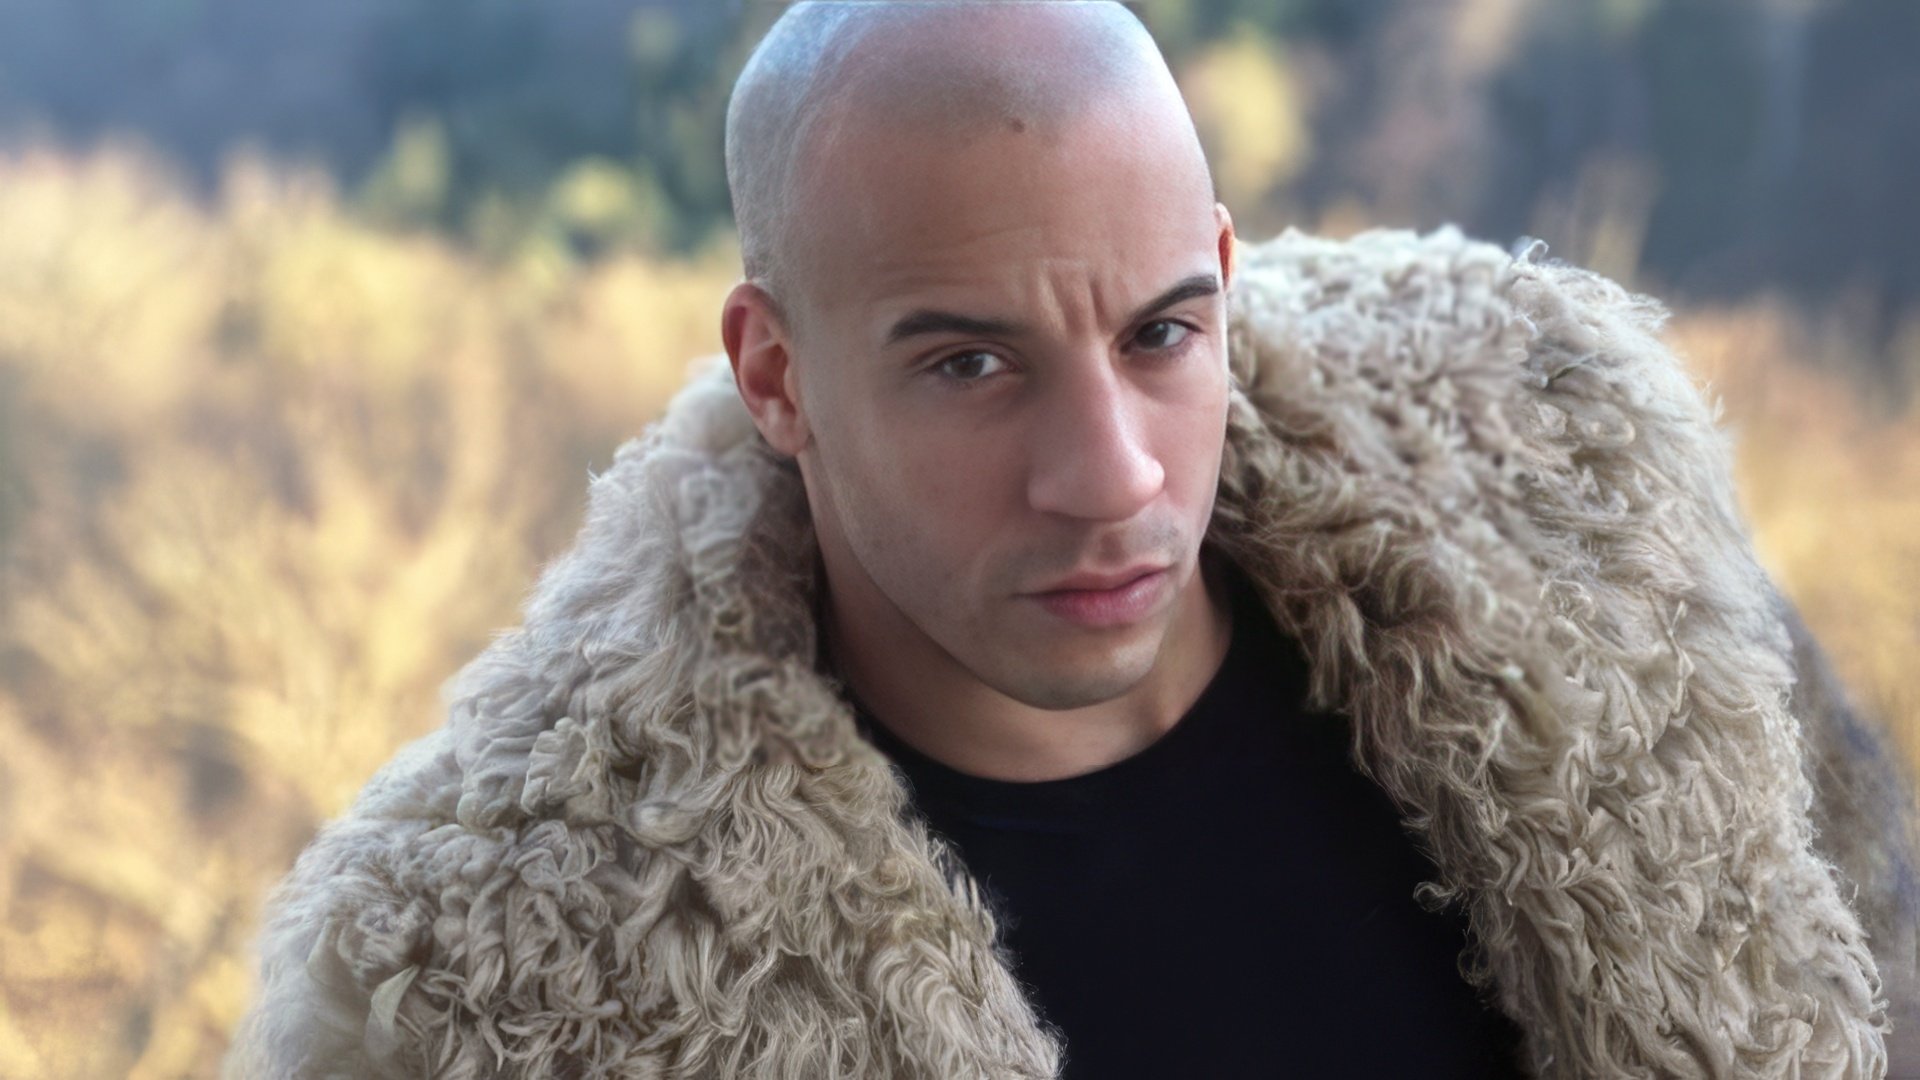 Vin Diesel's filmography had not only ups but also downs